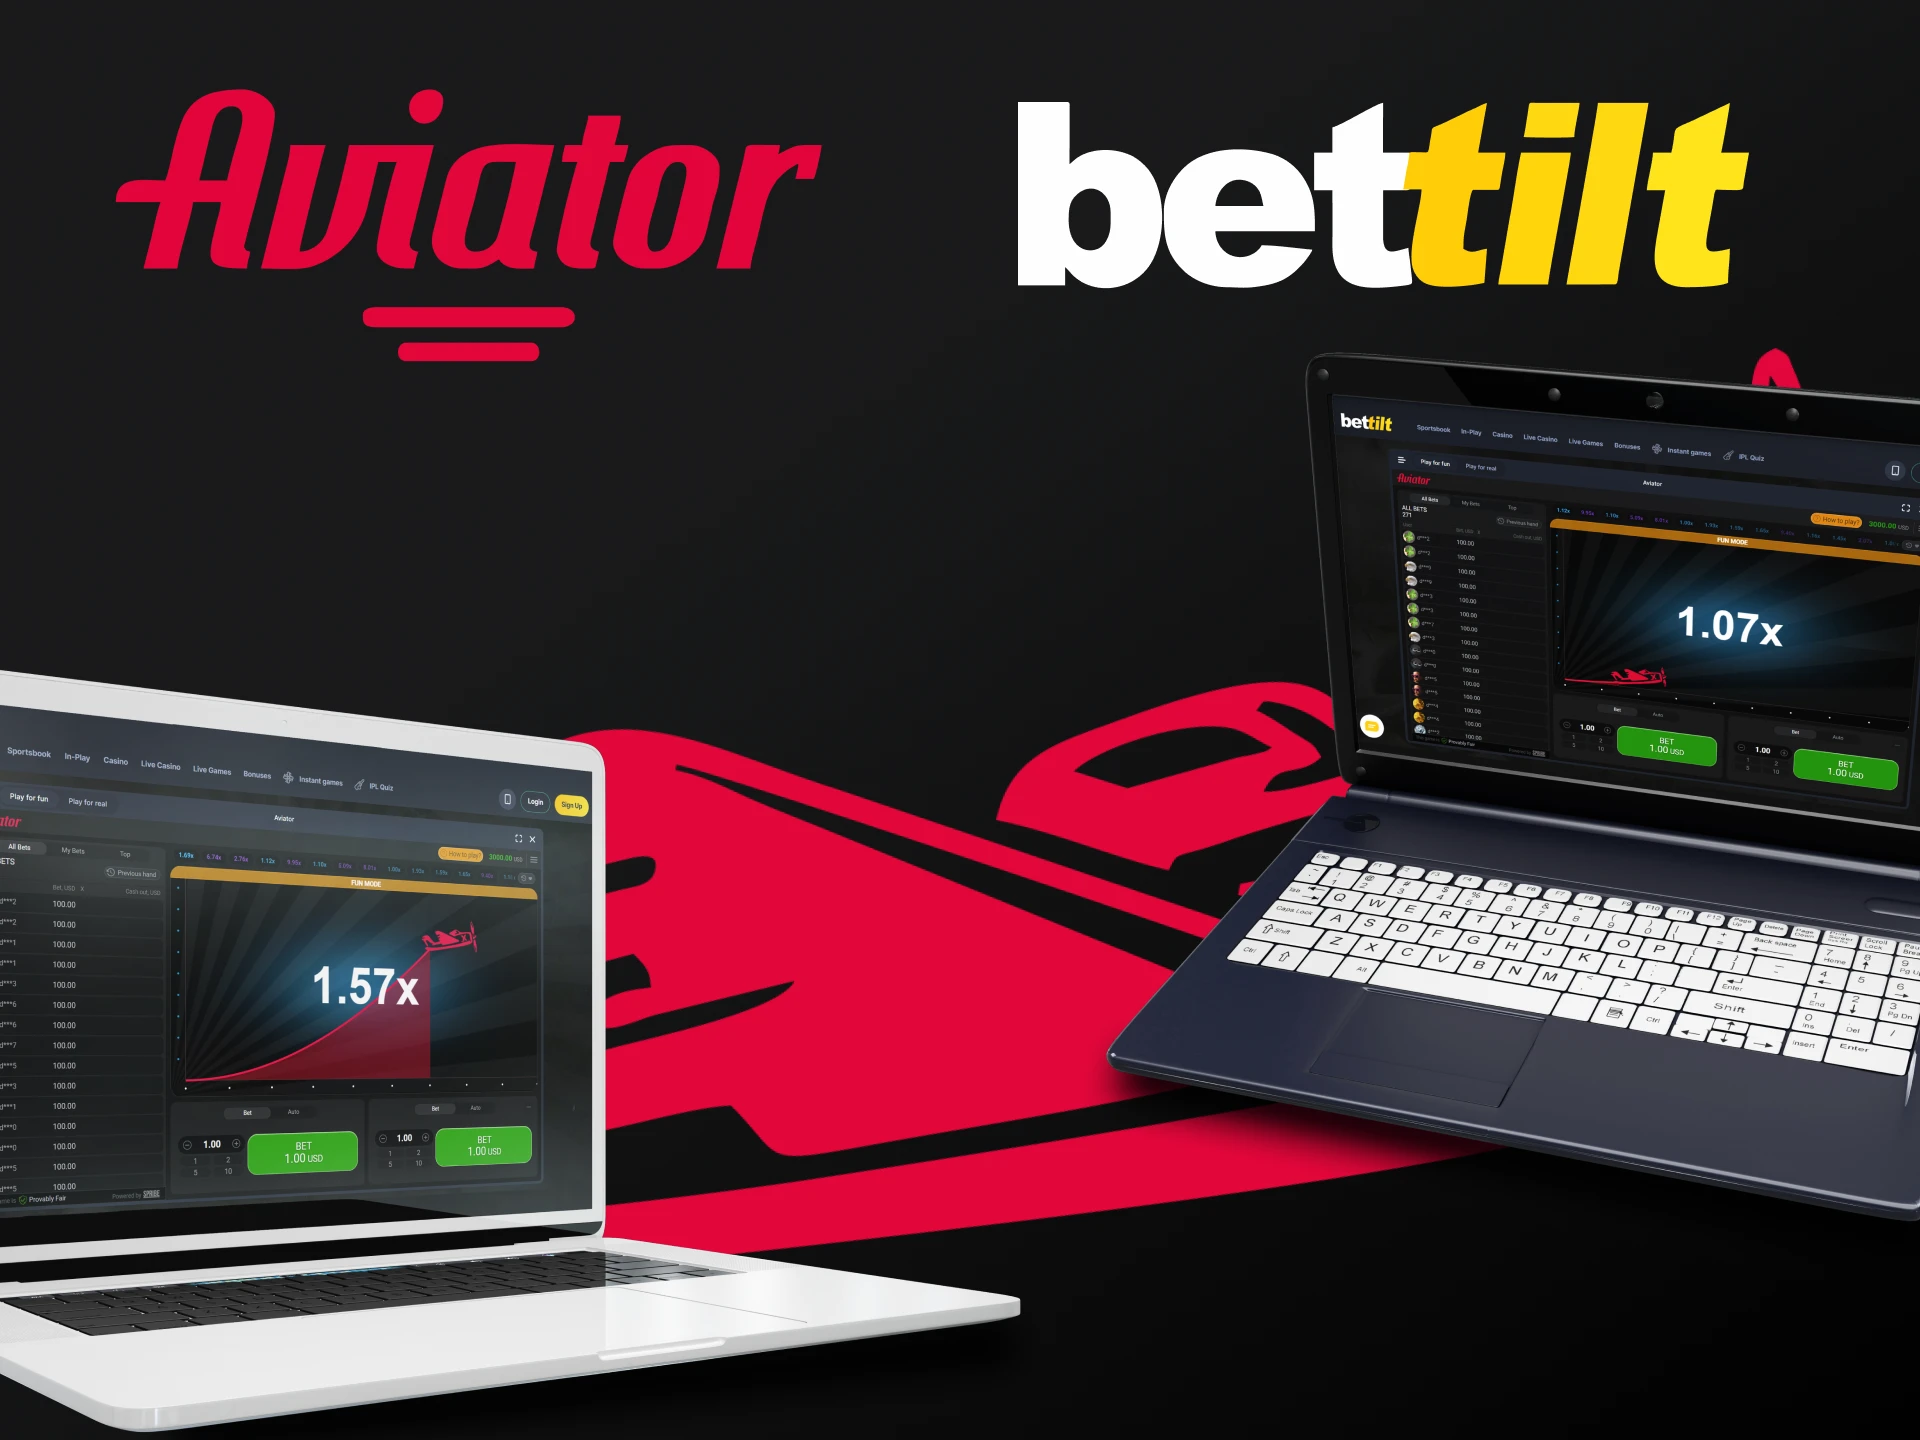 Find out which device is best for playing Aviator by Bettilt.